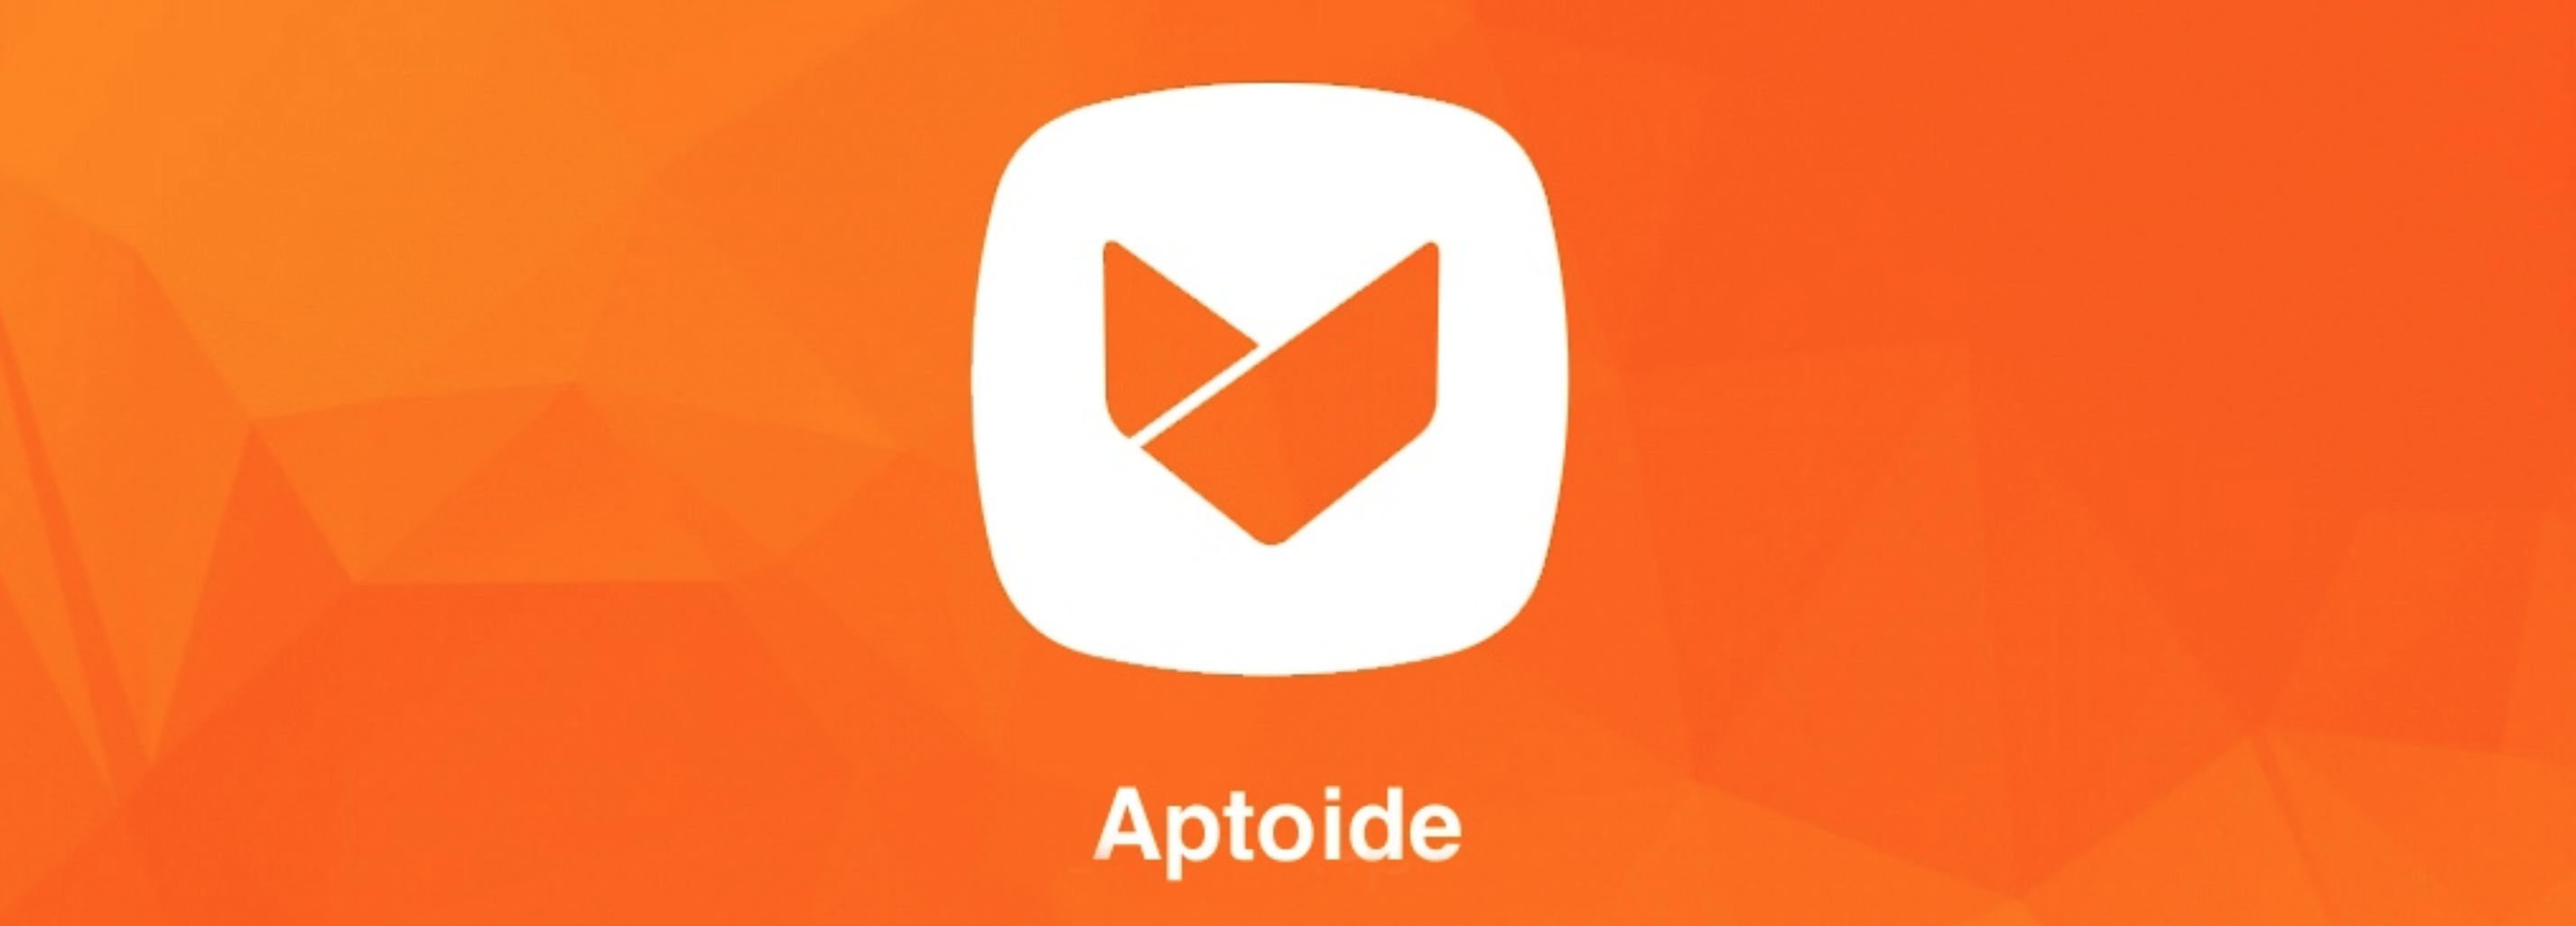 25 Top Images Aptoide App Store Online / 3 Things to Ponder Upon when Starting your Own Online Store